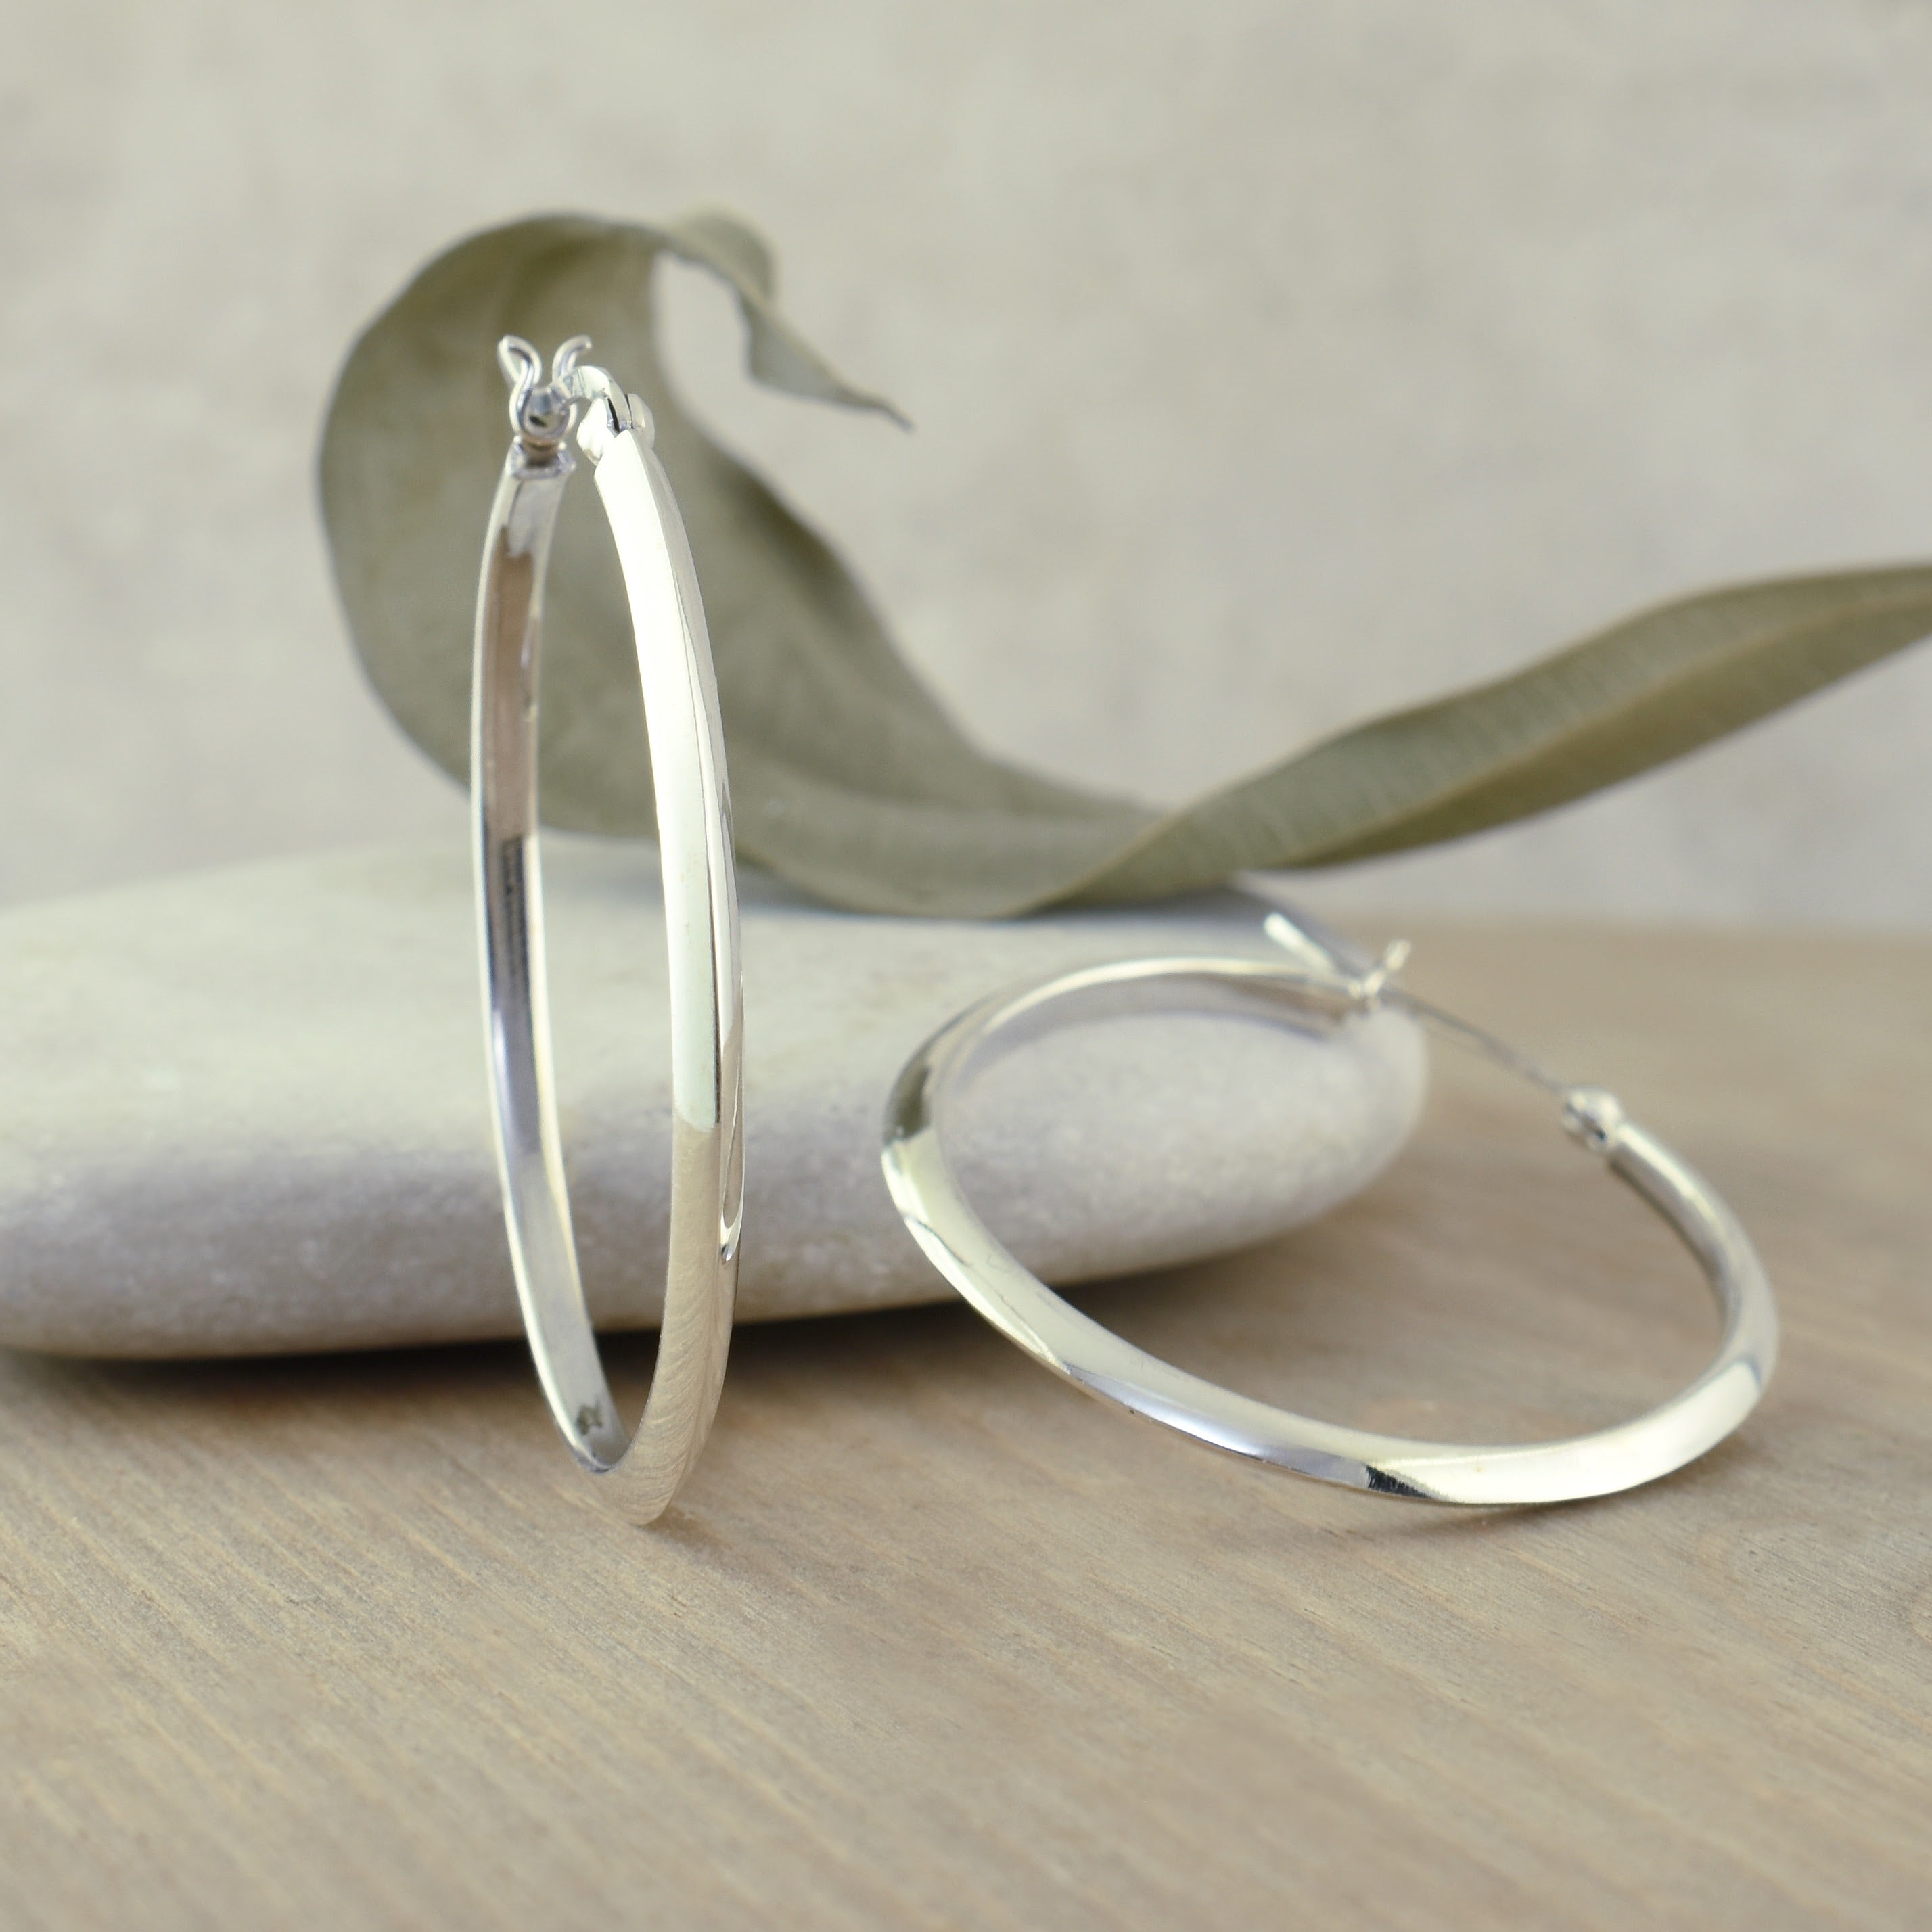 High polished sterling silver in v-snap closure style earrings